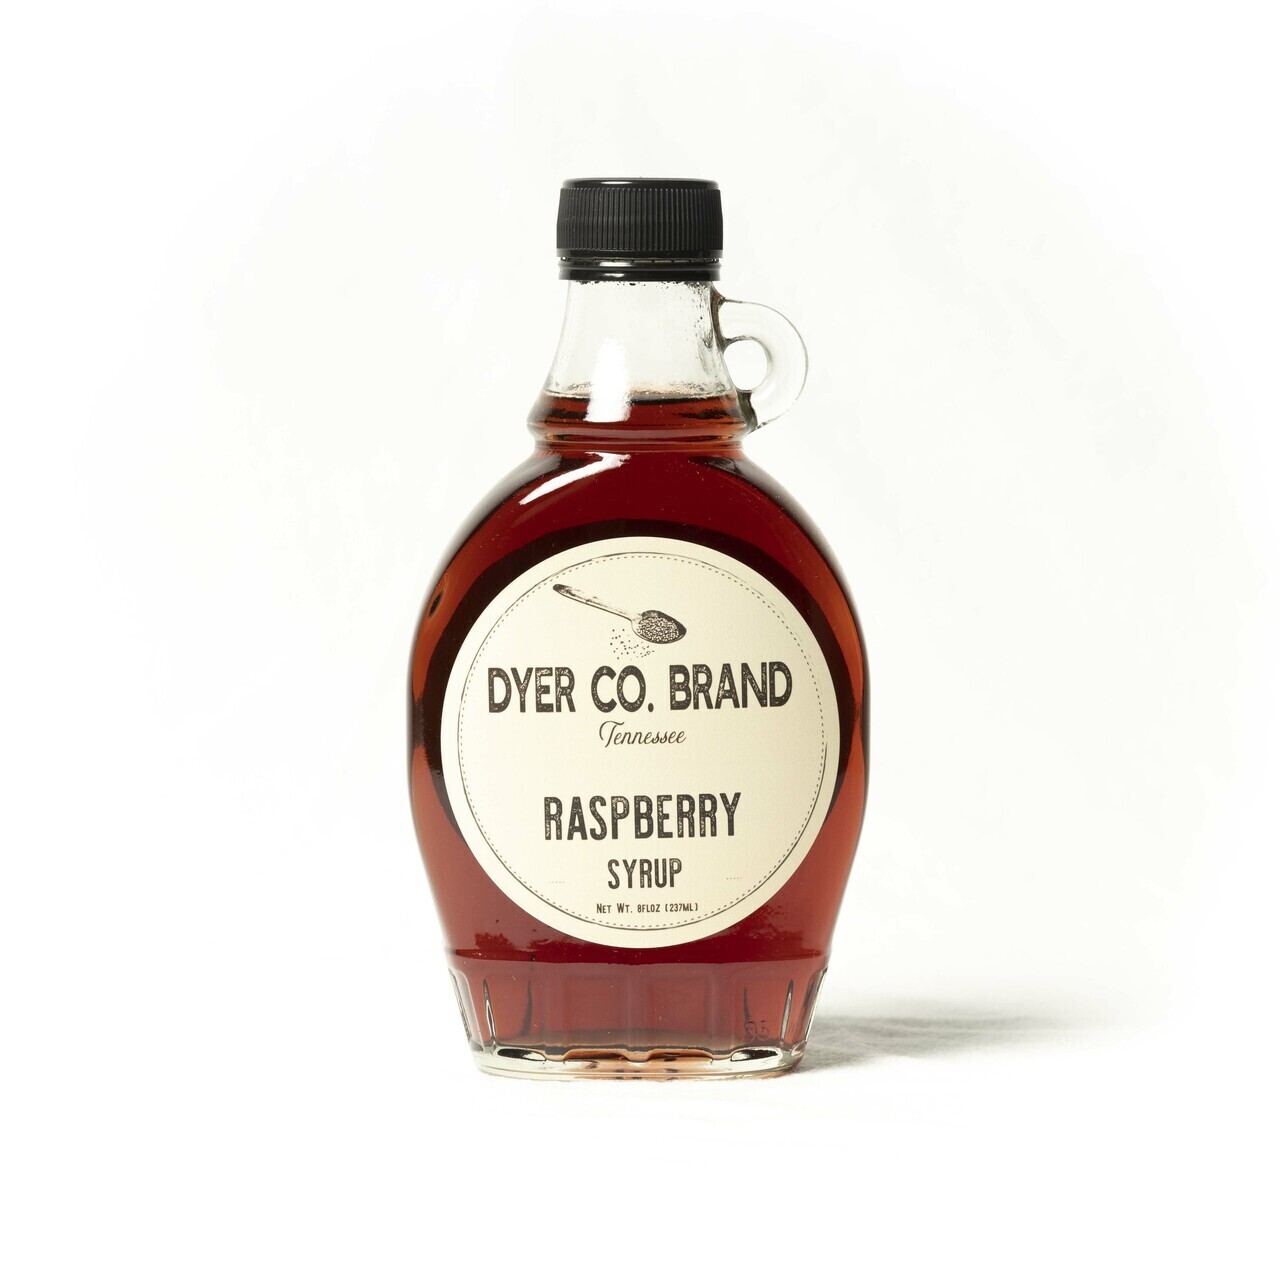 Dyer Co Brand Raspberry Syrup